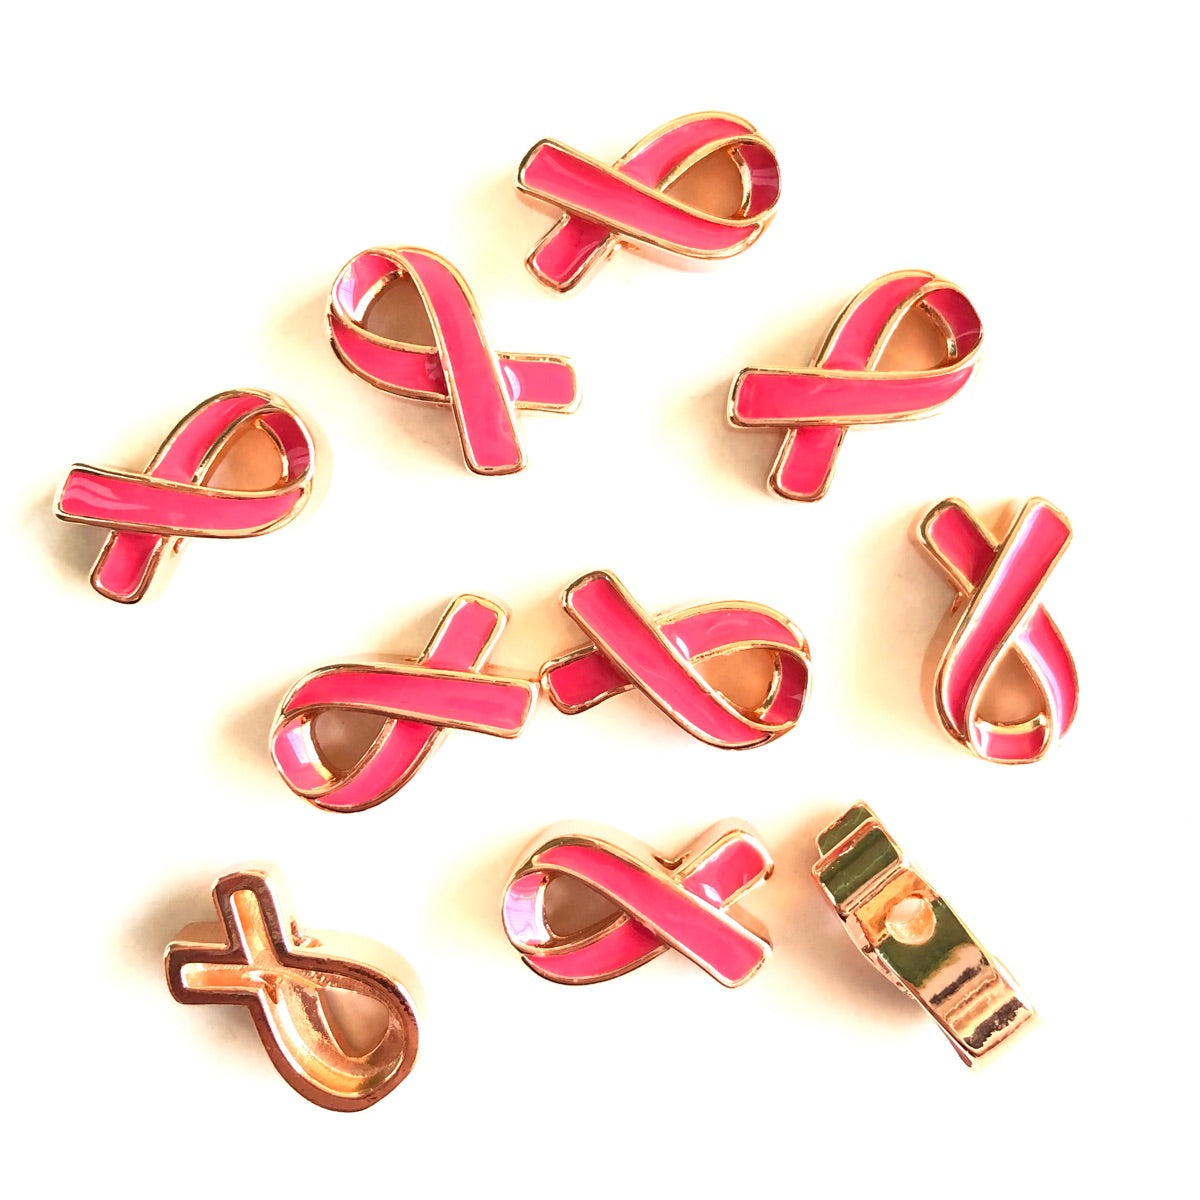 10-20pcs/lot Enamel Pink Ribbon Spacers Beads for Breast Cancer Awareness Rose Gold CZ Paved Spacers Breast Cancer Awareness New Spacers Arrivals Charms Beads Beyond